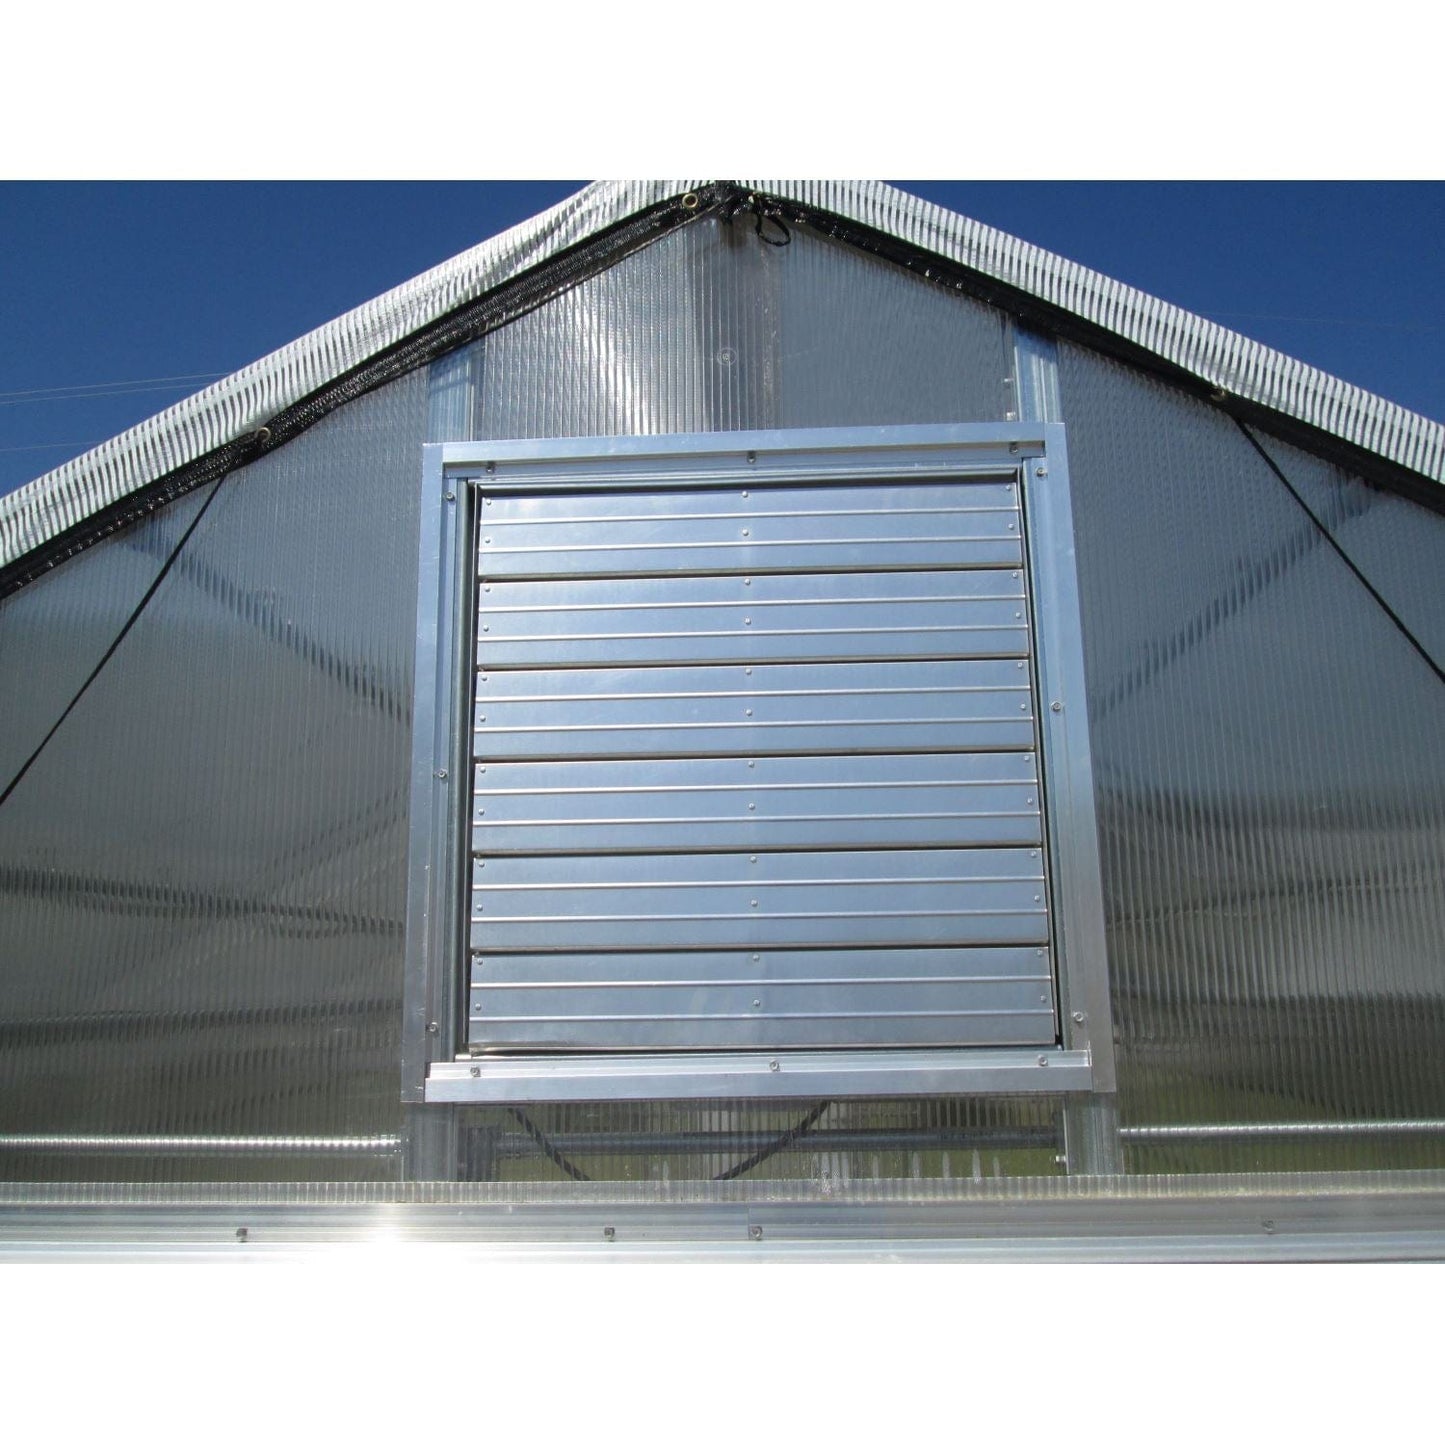 Riverstone Industries Educational Greenhouse Kit Riverstone | Jefferson 16FT x 24FT Educational Greenhouse Kit With 6FT High Walls R16246-P